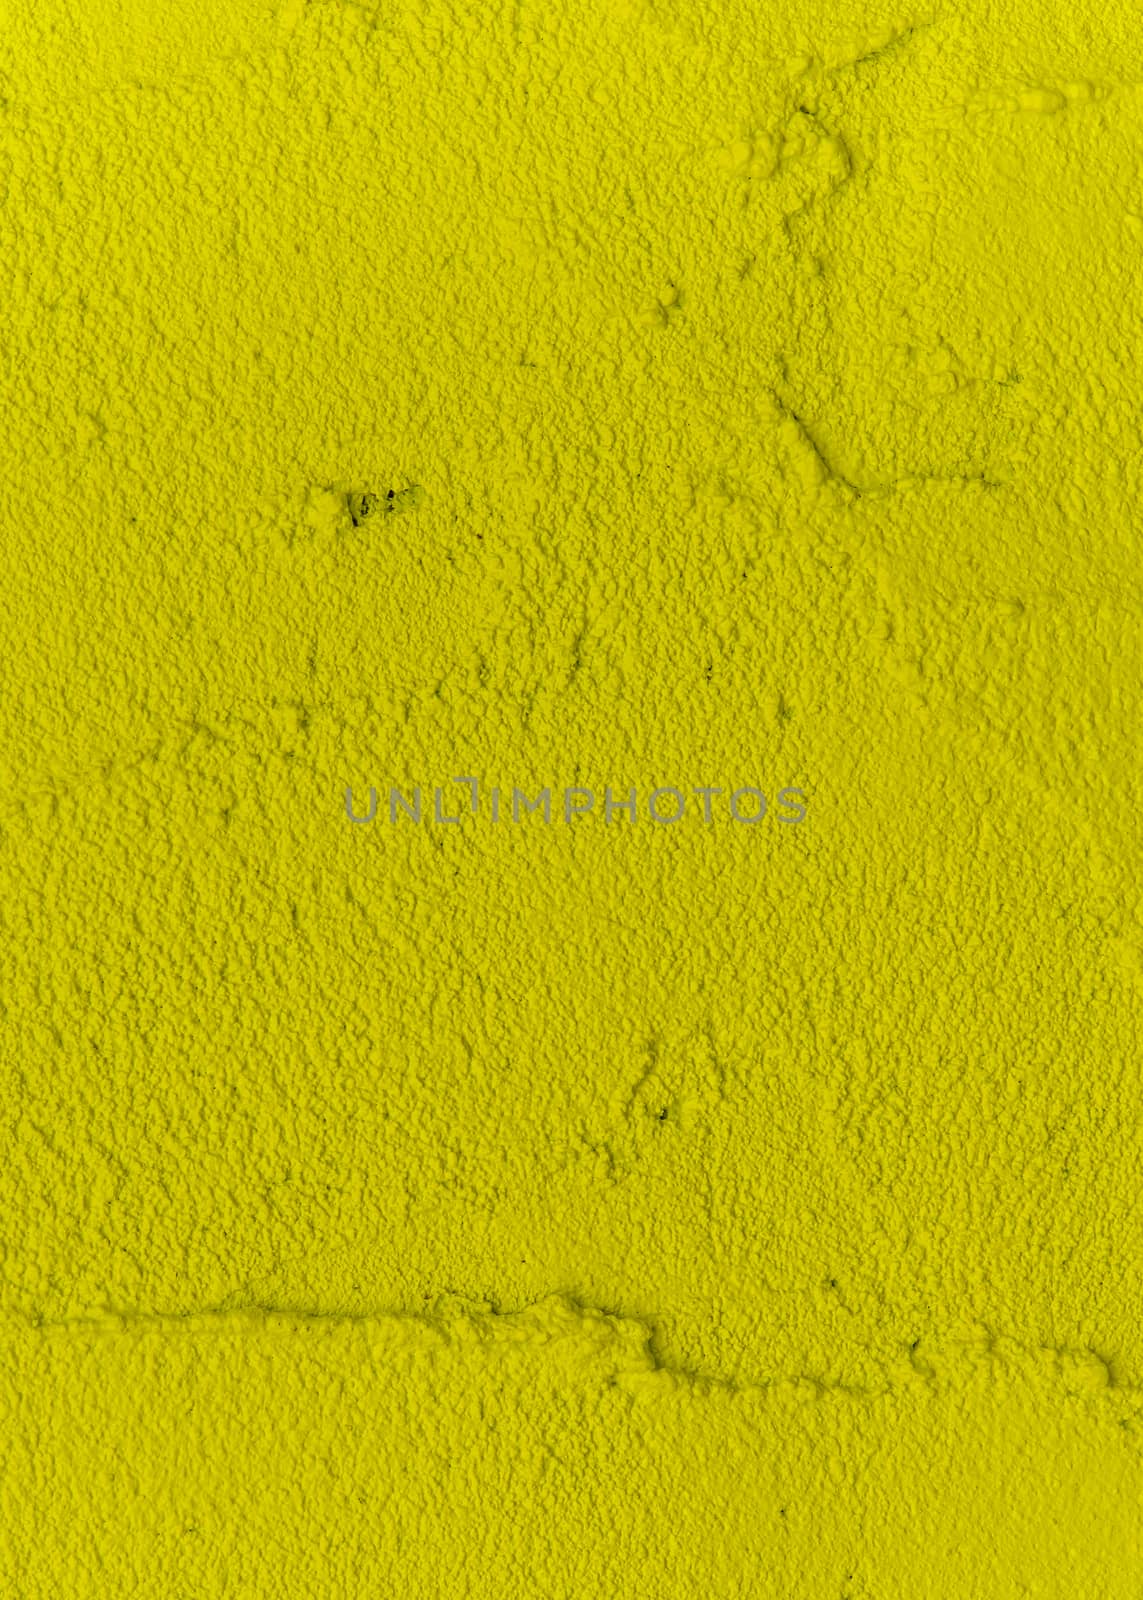 Yellow cement floor background.For art texture for web design and web background.